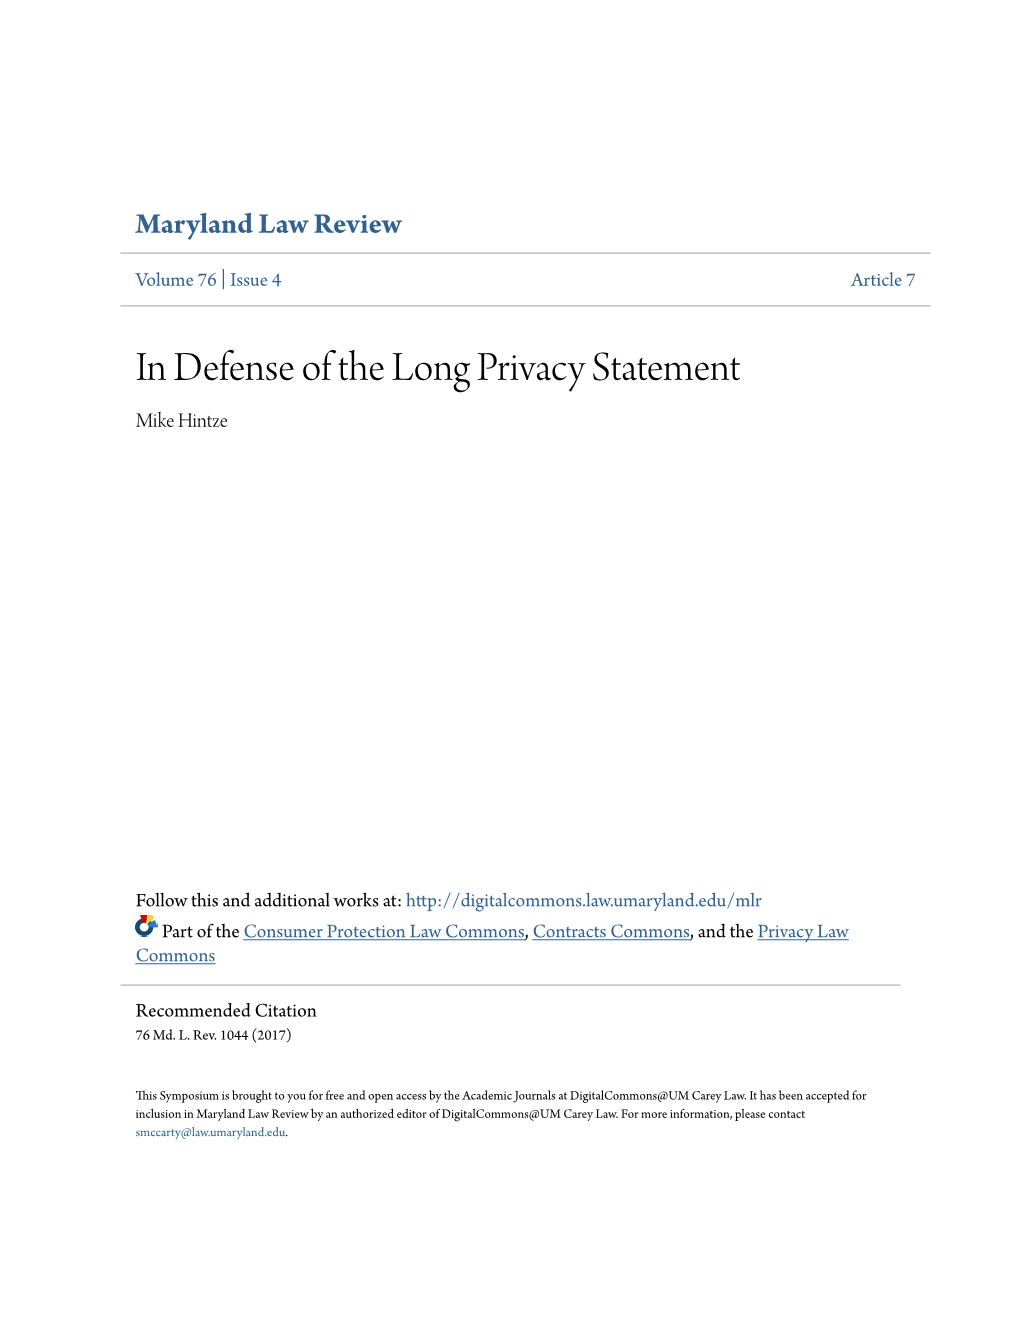 In Defense of the Long Privacy Statement Mike Hintze